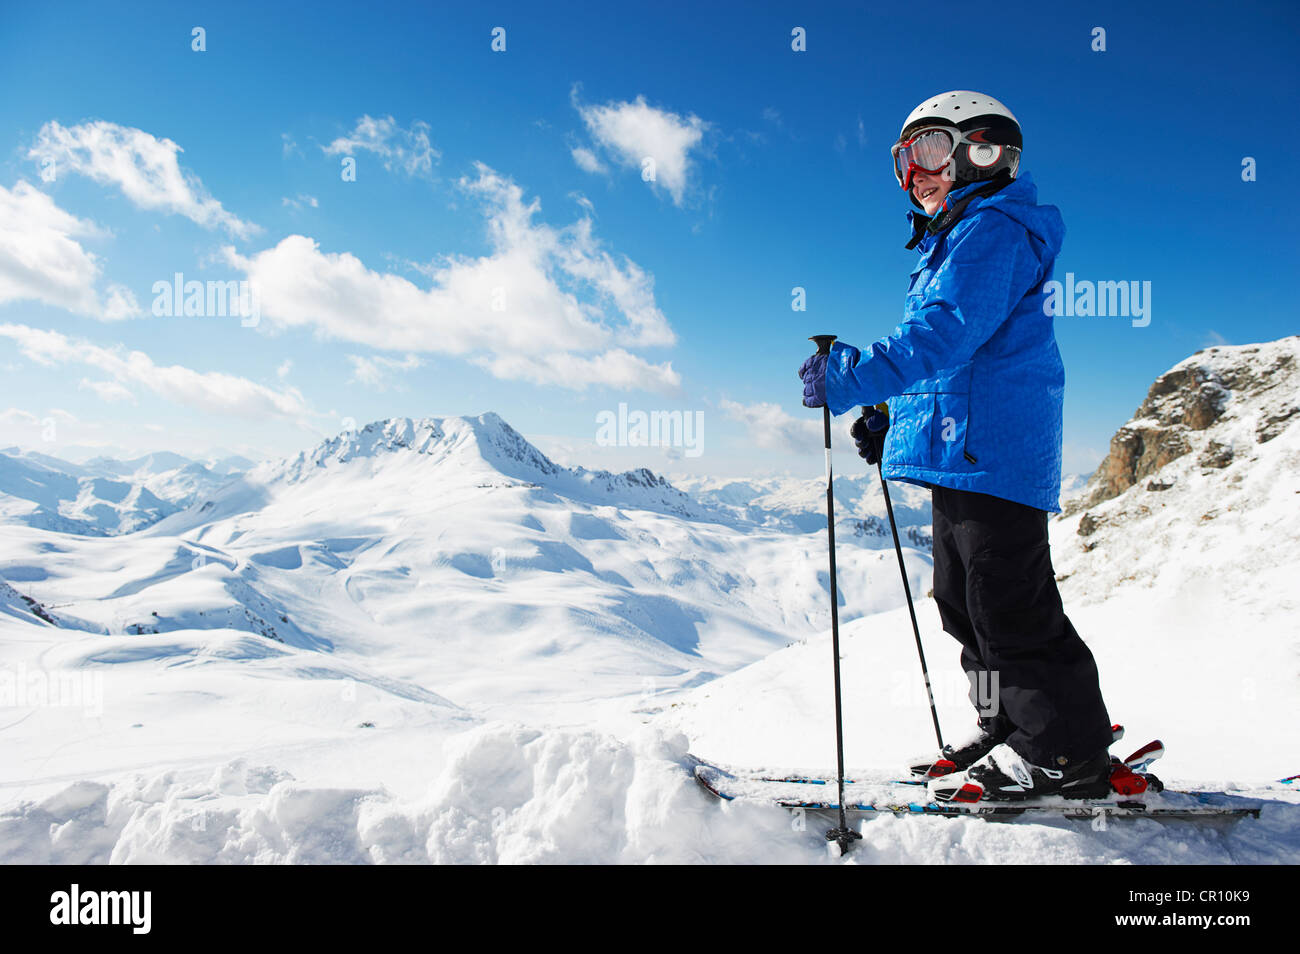 Boy in skis on snowy mountaintop Stock Photo